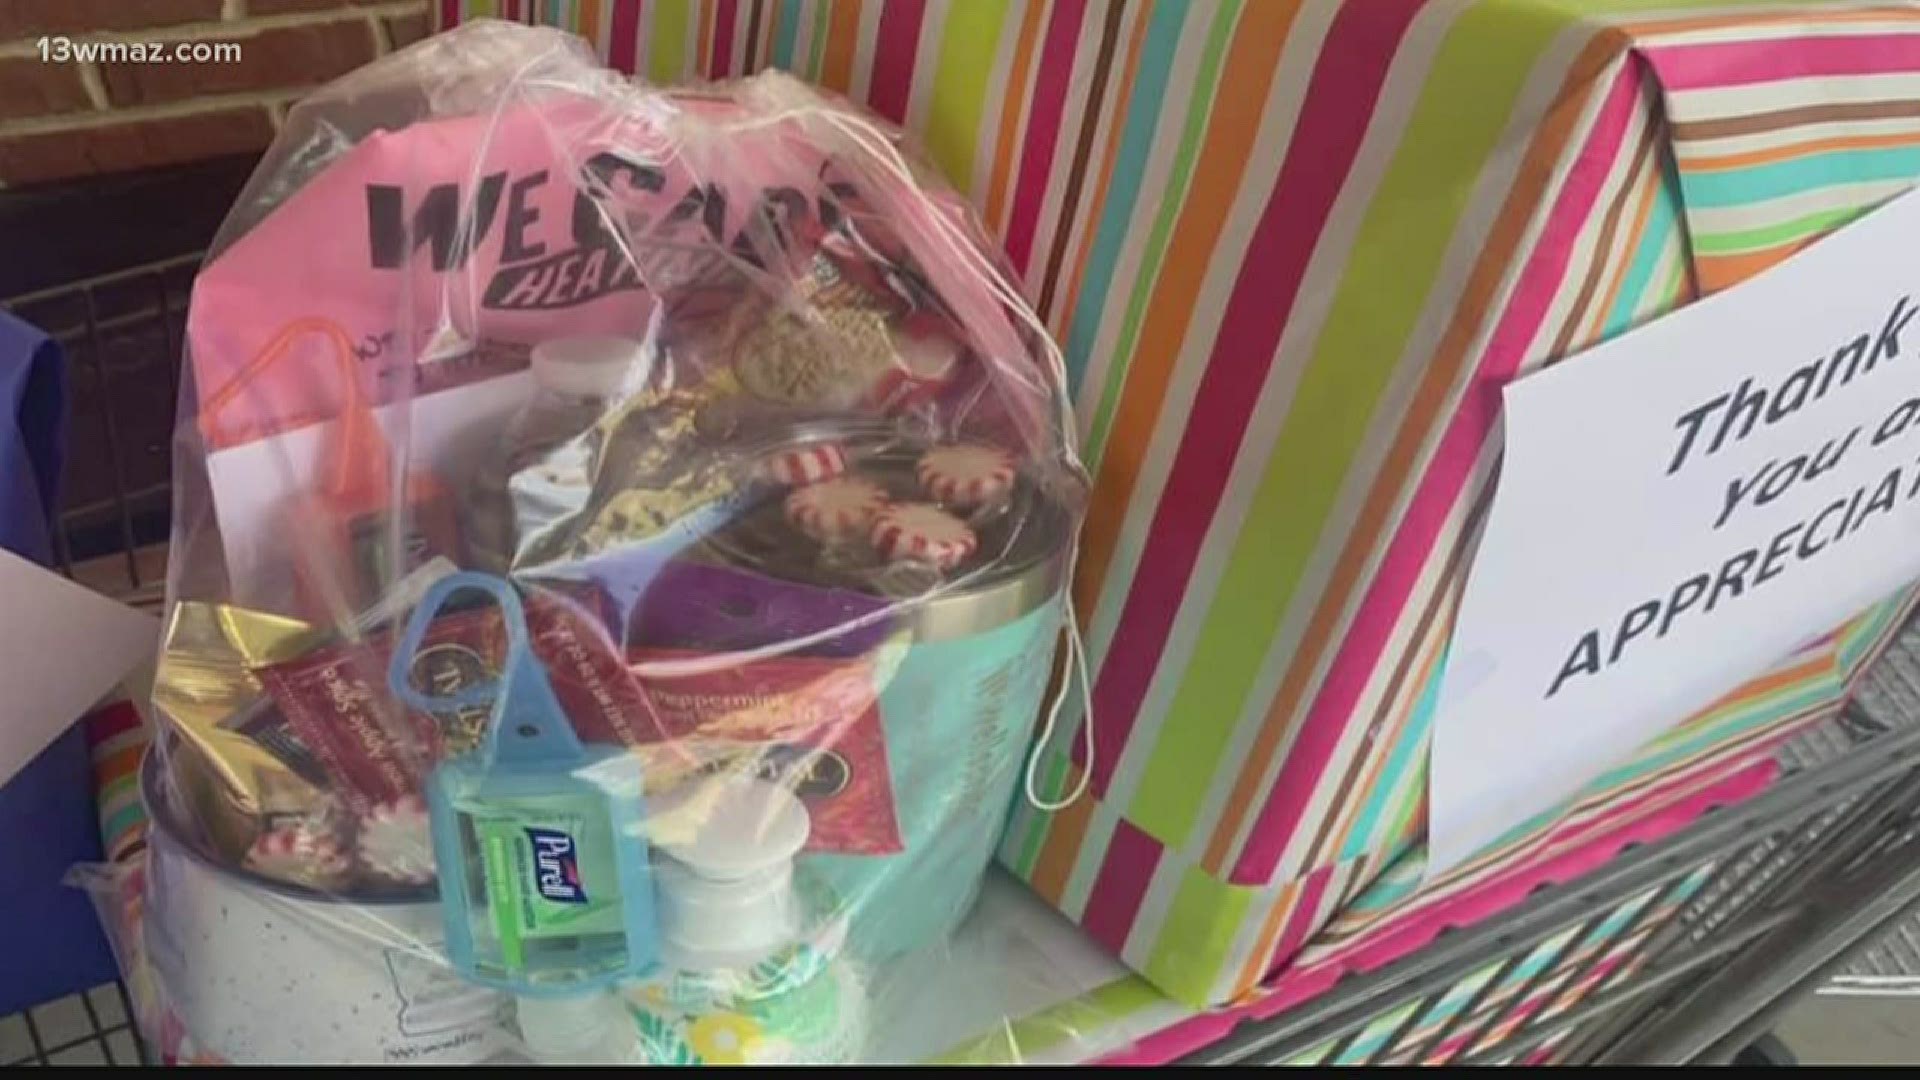 Wellspring Church and local businesses teamed up to make 300 baskets.